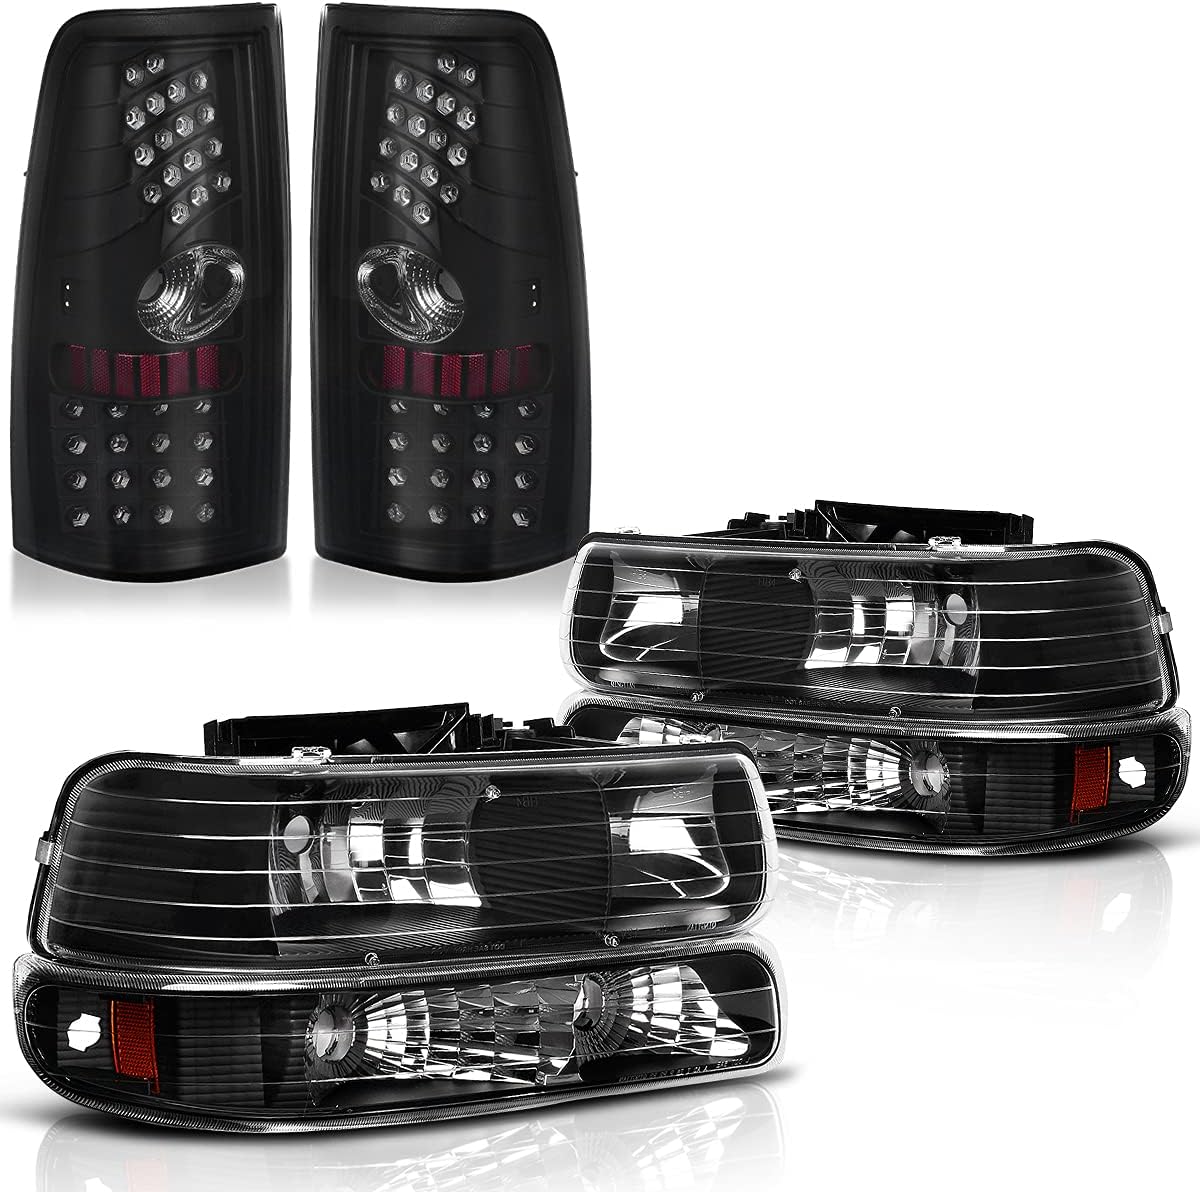 DWVO Headlights Tail Lights Assembly Compatible with 1999-2002 Chevy Silverado 1500/2500, 2001-2002 Chevrolet Silverado 3500 Clear Lens Replacement Headlights + Smoke Lens LED Taillights Combo